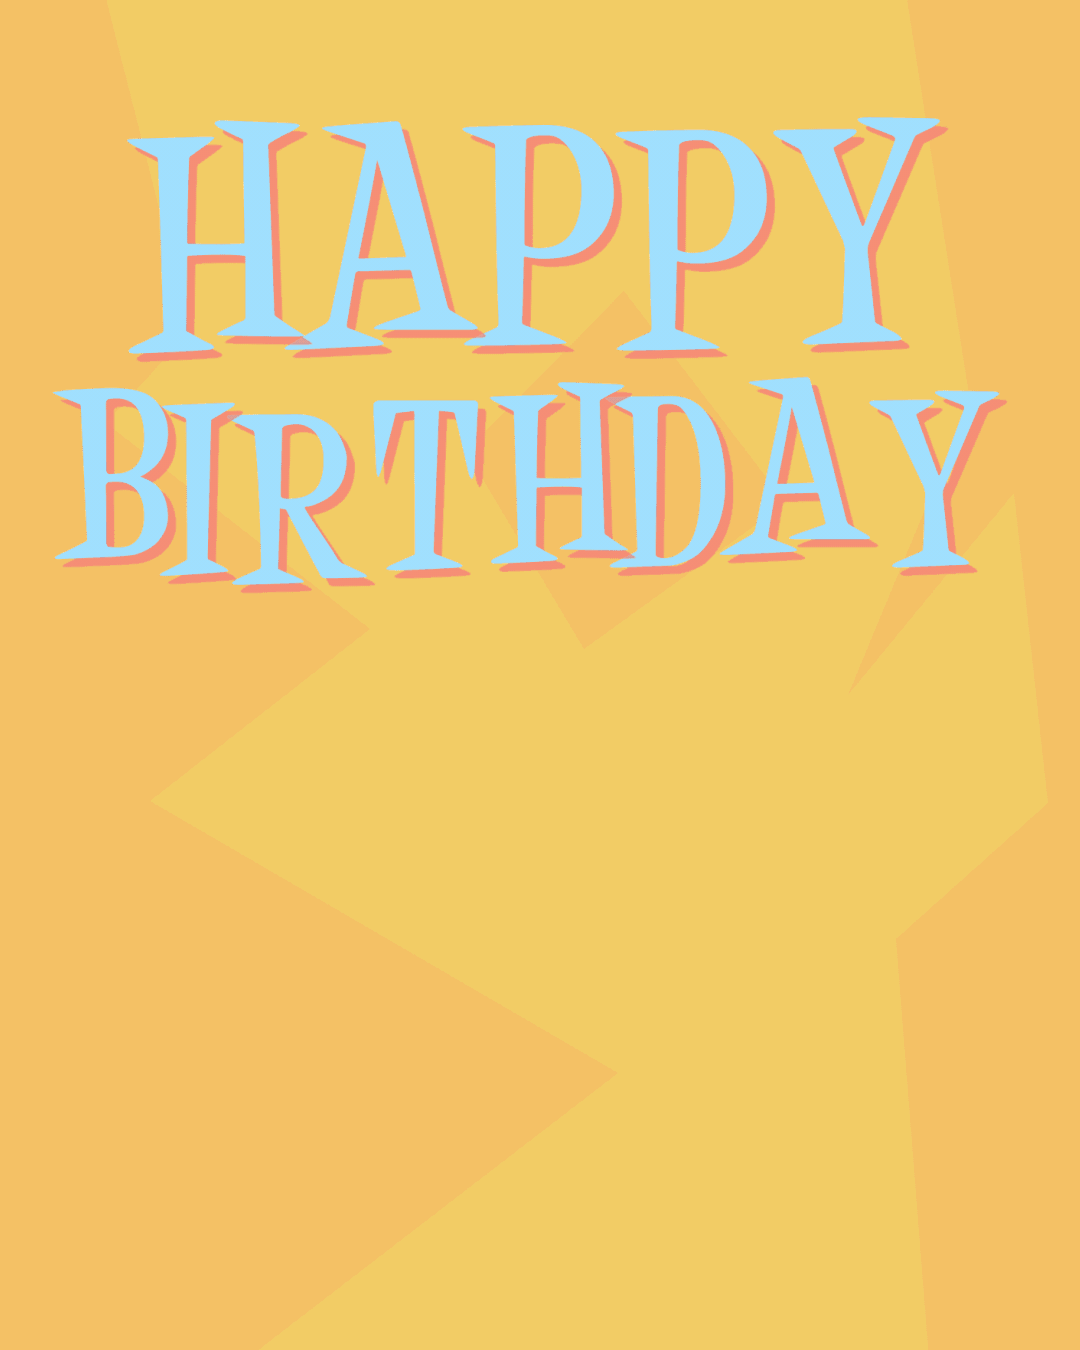 Beautiful Happy Birthday Animated GIF Images Free Download